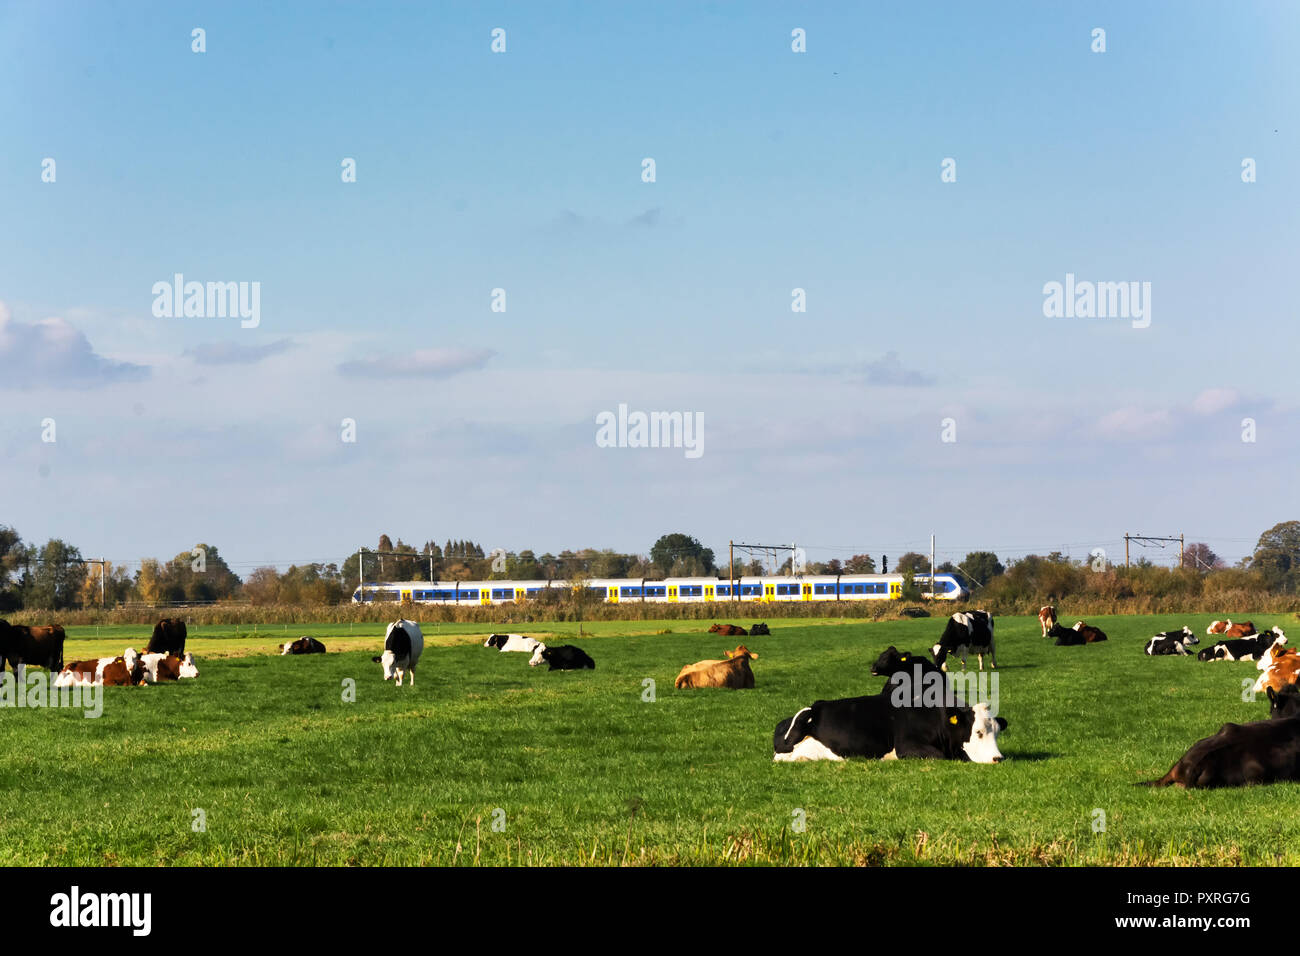 View on juicy green grasslands in the Netherlands with a herd of dutch cows on it. Public transport, a train, is seen in the distance. Stock Photo